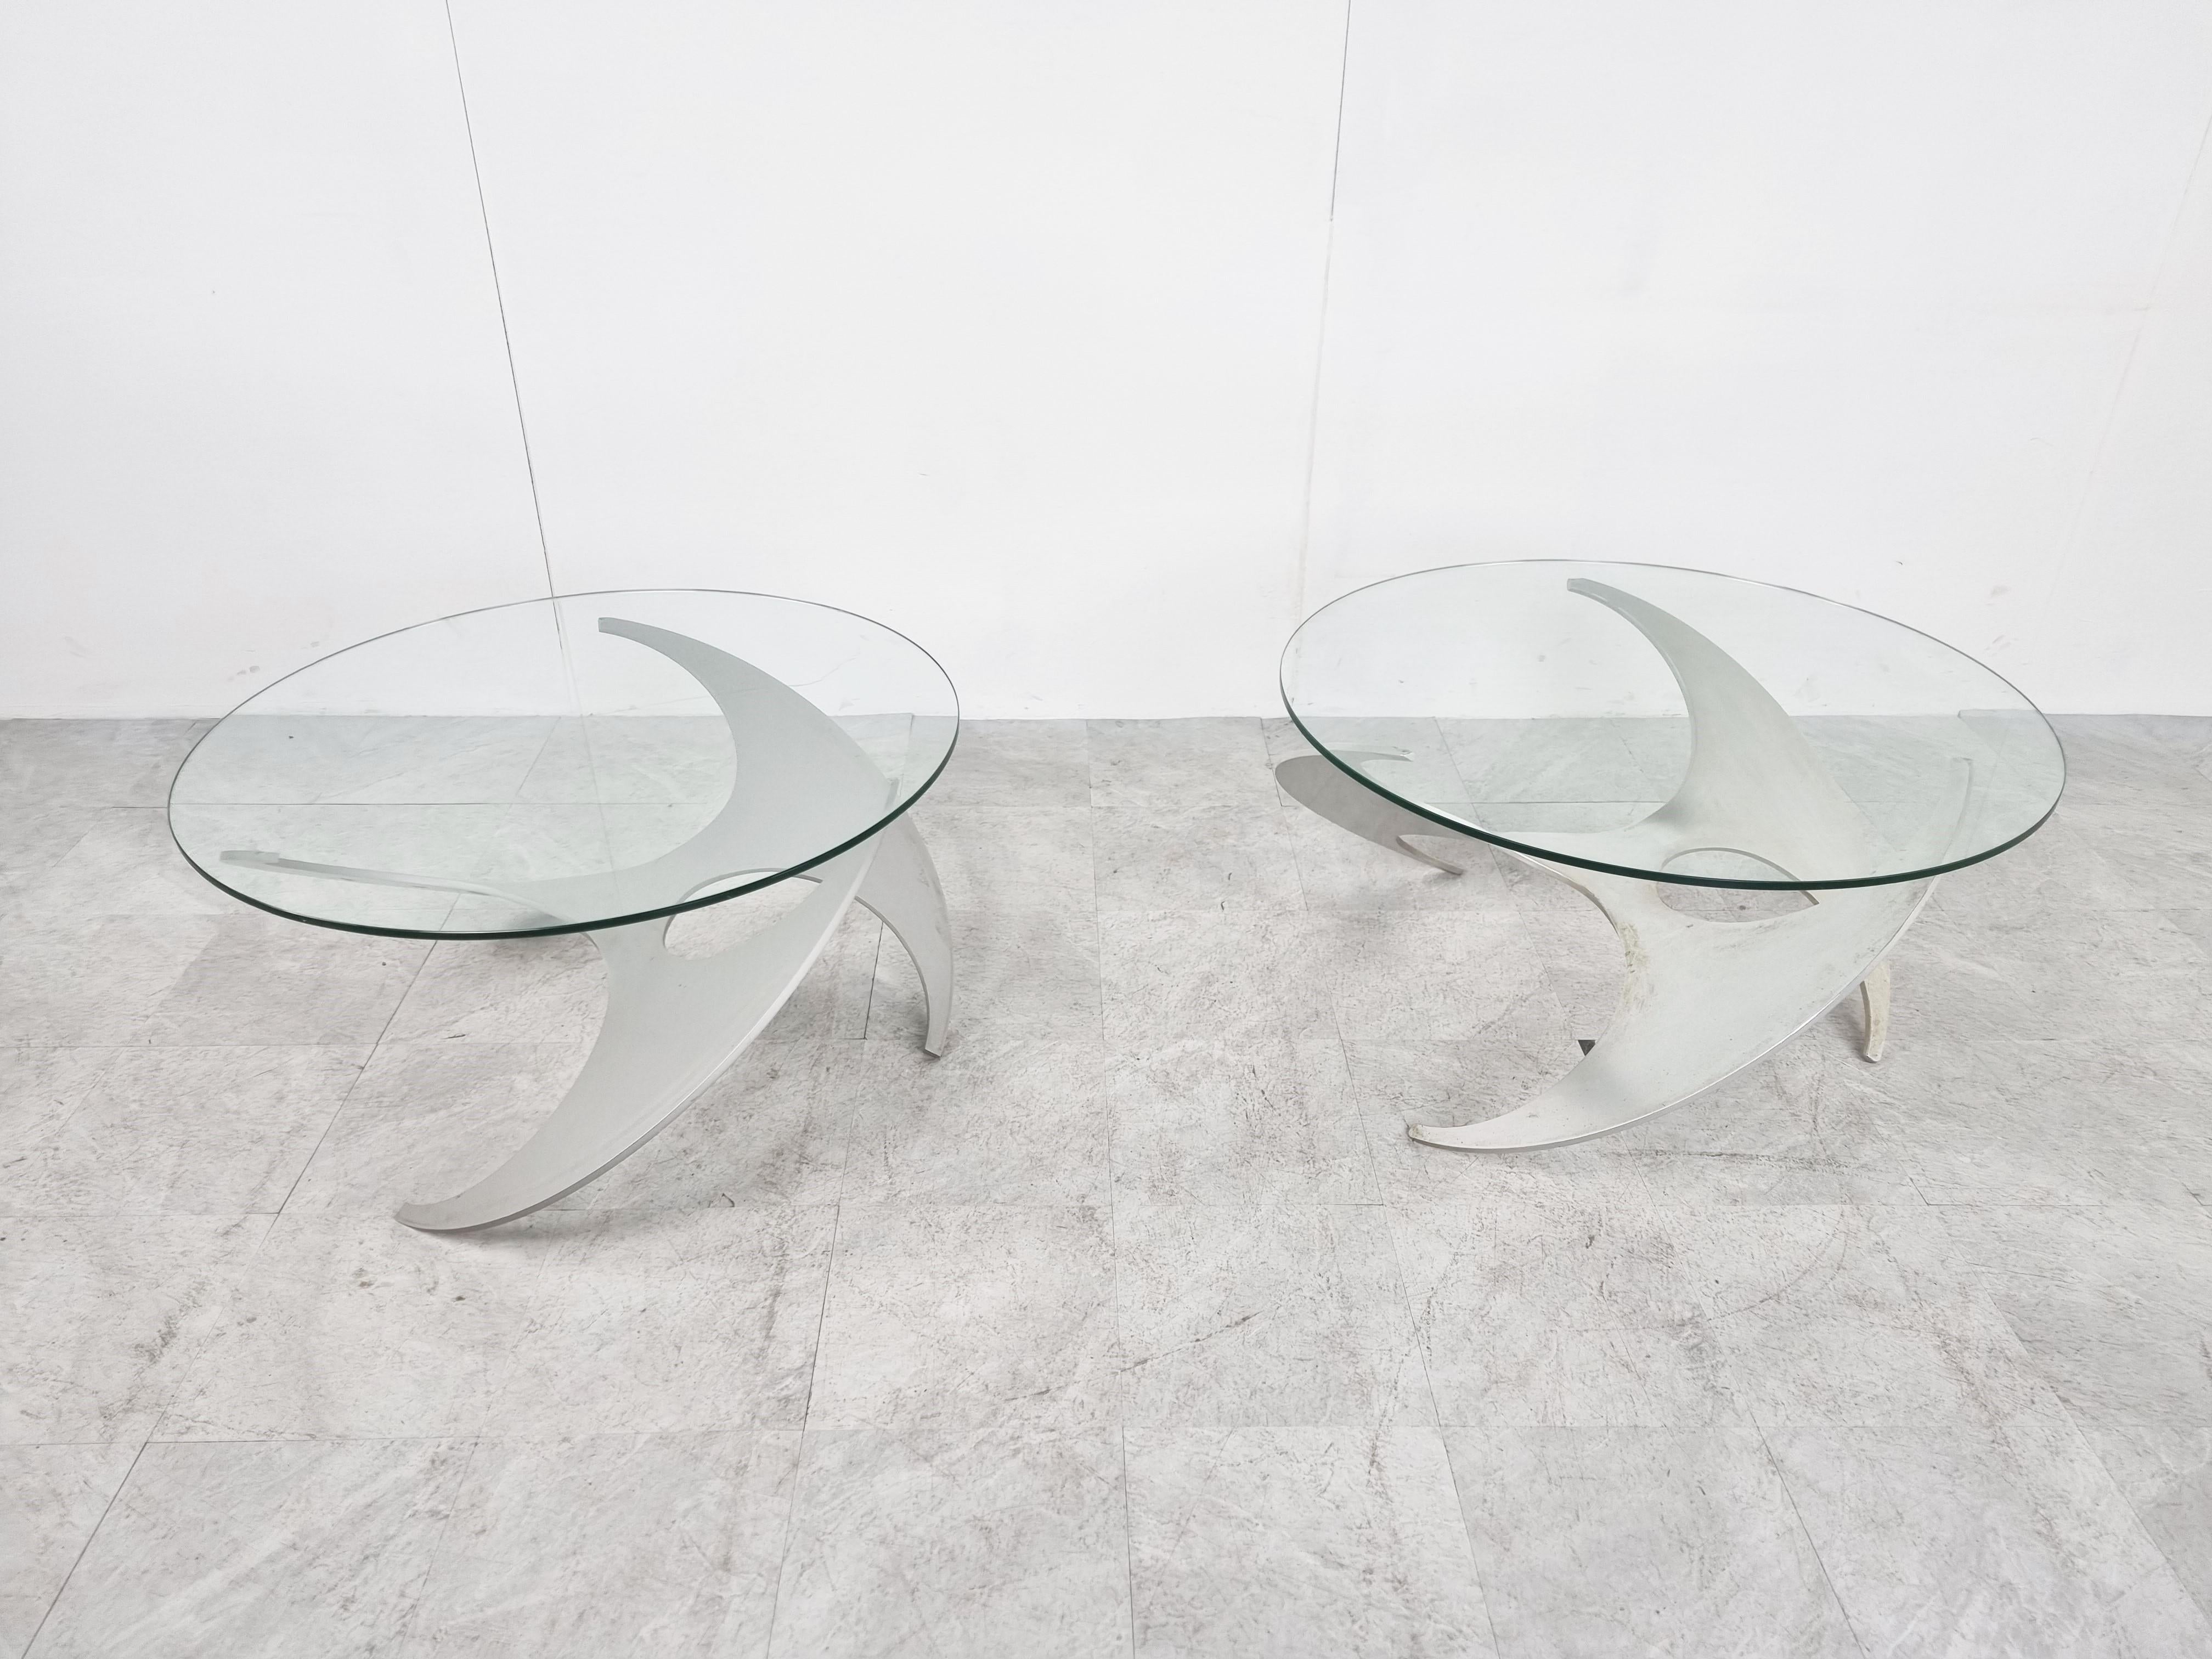 German Vintage Propellor Coffee Tables by Knut Hesterberg, 1960s - Set of 2